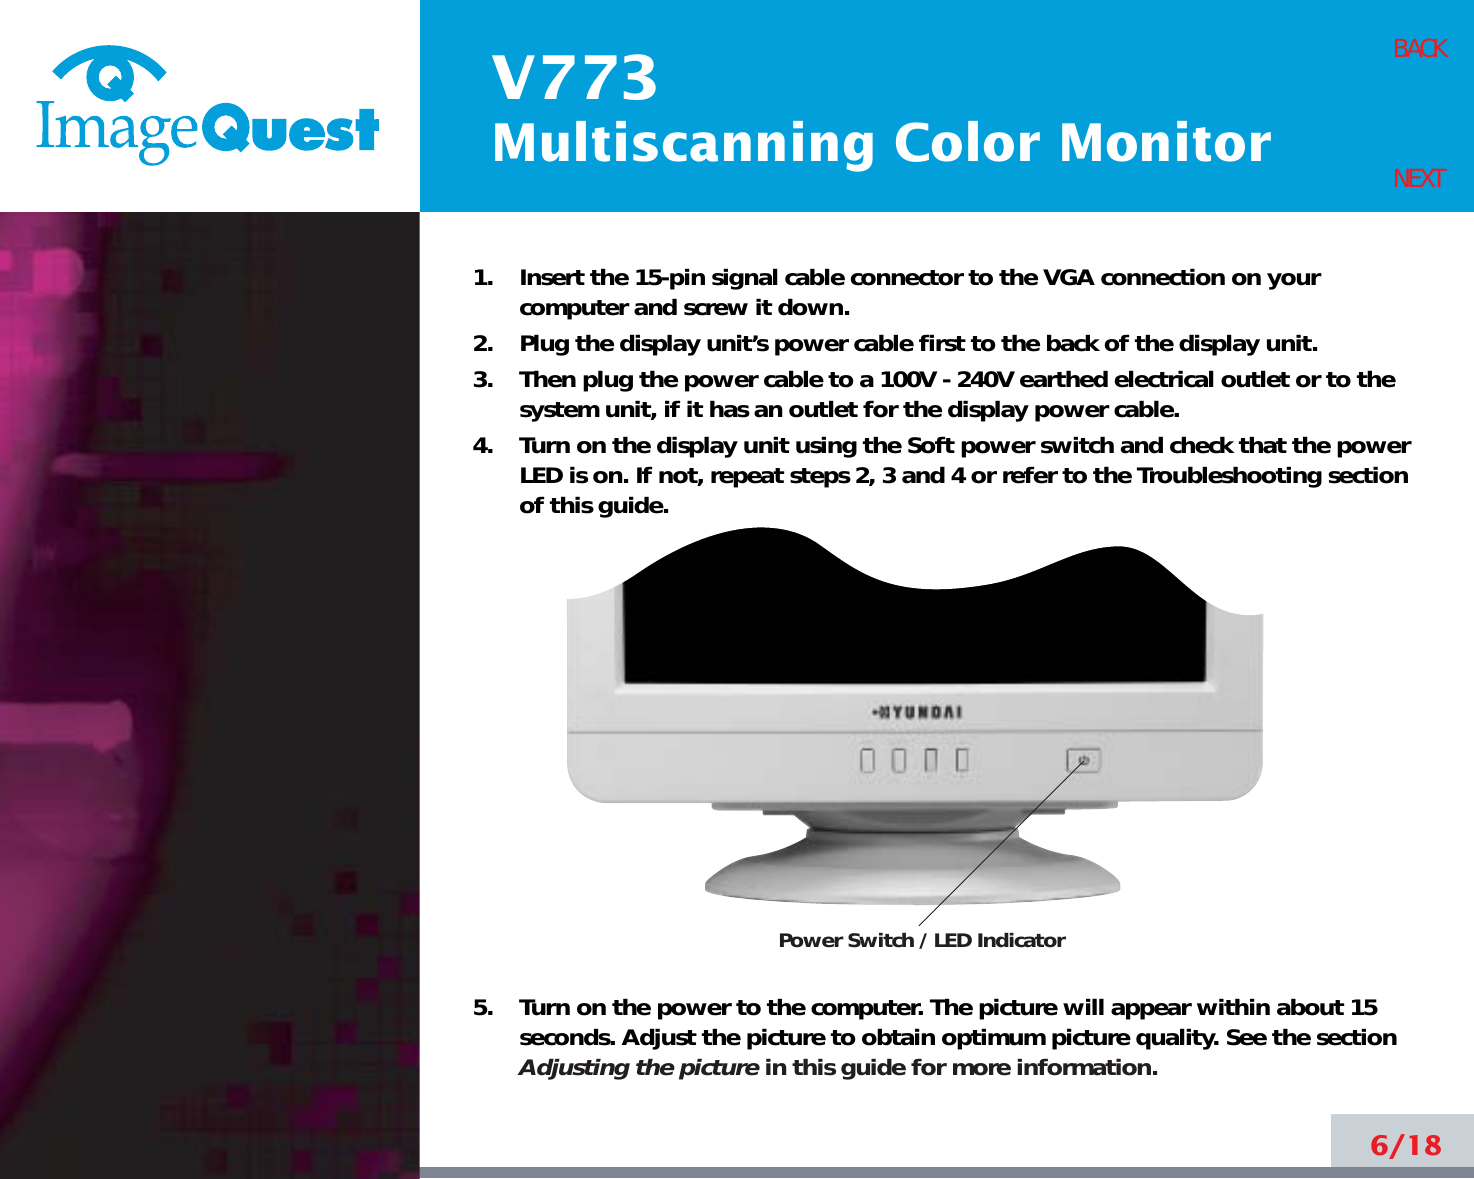 V773Multiscanning Color Monitor6/18BACKNEXT1.    Insert the 15-pin signal cable connector to the VGA connection on yourcomputer and screw it down.2.    Plug the display unit’s power cable first to the back of the display unit.3.    Then plug the power cable to a 100V - 240V earthed electrical outlet or to thesystem unit, if it has an outlet for the display power cable.4.    Turn on the display unit using the Soft power switch and check that the powerLED is on. If not, repeat steps 2, 3 and 4 or refer to the Troubleshooting sectionof this guide.5.    Turn on the power to the computer. The picture will appear within about 15seconds. Adjust the picture to obtain optimum picture quality. See the sectionAdjusting the picture in this guide for more information.Power Switch / LED Indicator